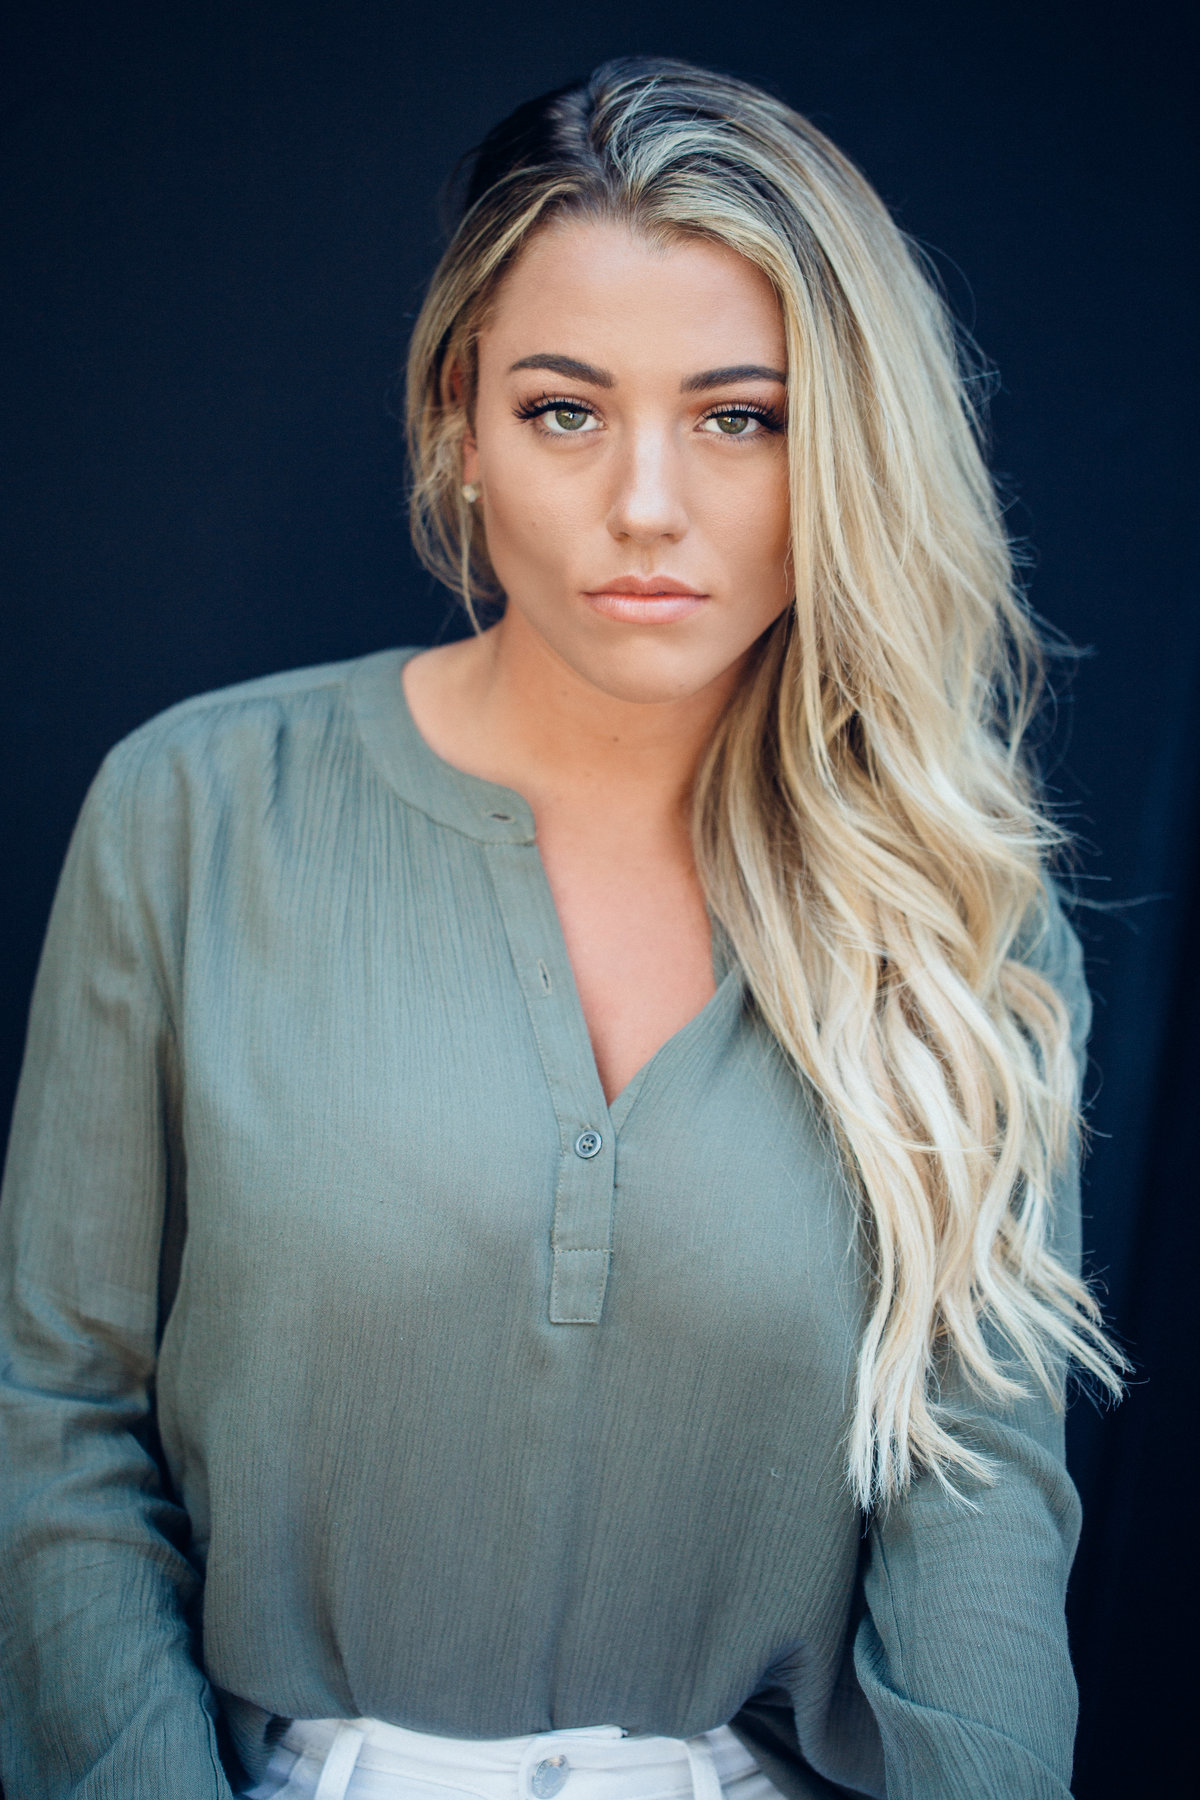 Headshot Photograph Of Young Woman In Gray Long Sleeves Los Angeles